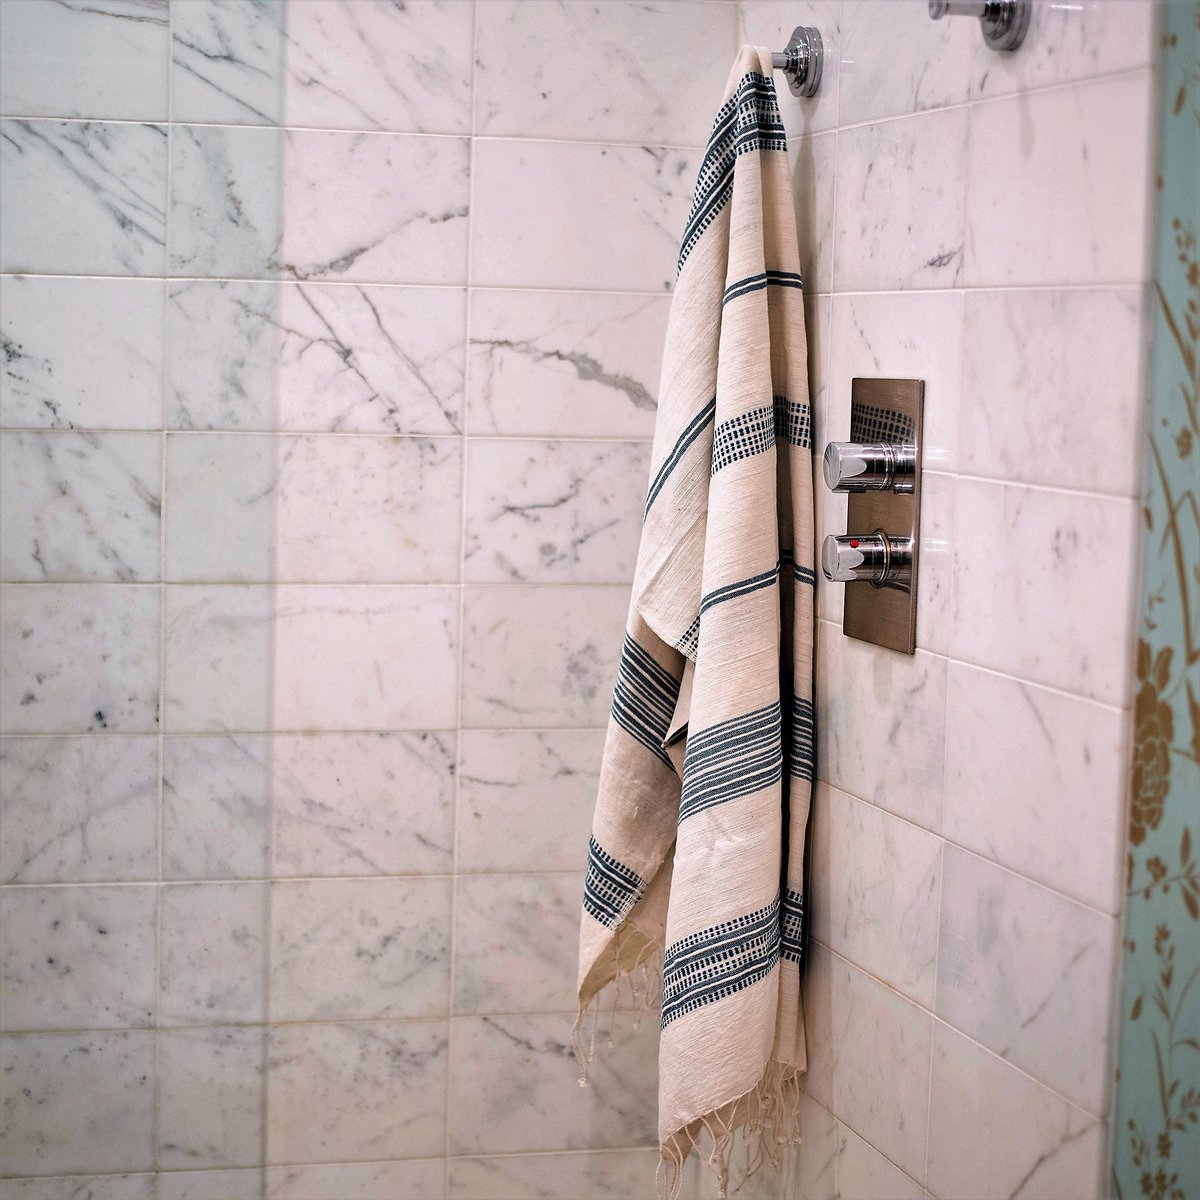 The Tana Towel - you ain’t ever stepped into post-bath luxury like this before...➡️l8r.it/6qJF #greenliving #sustainabledesign #coralgablesinteriordesign #washingtondcinteriordesign #neworleansinteriordesign #portlandinteriordesign #bathtowels #handloomedtowels